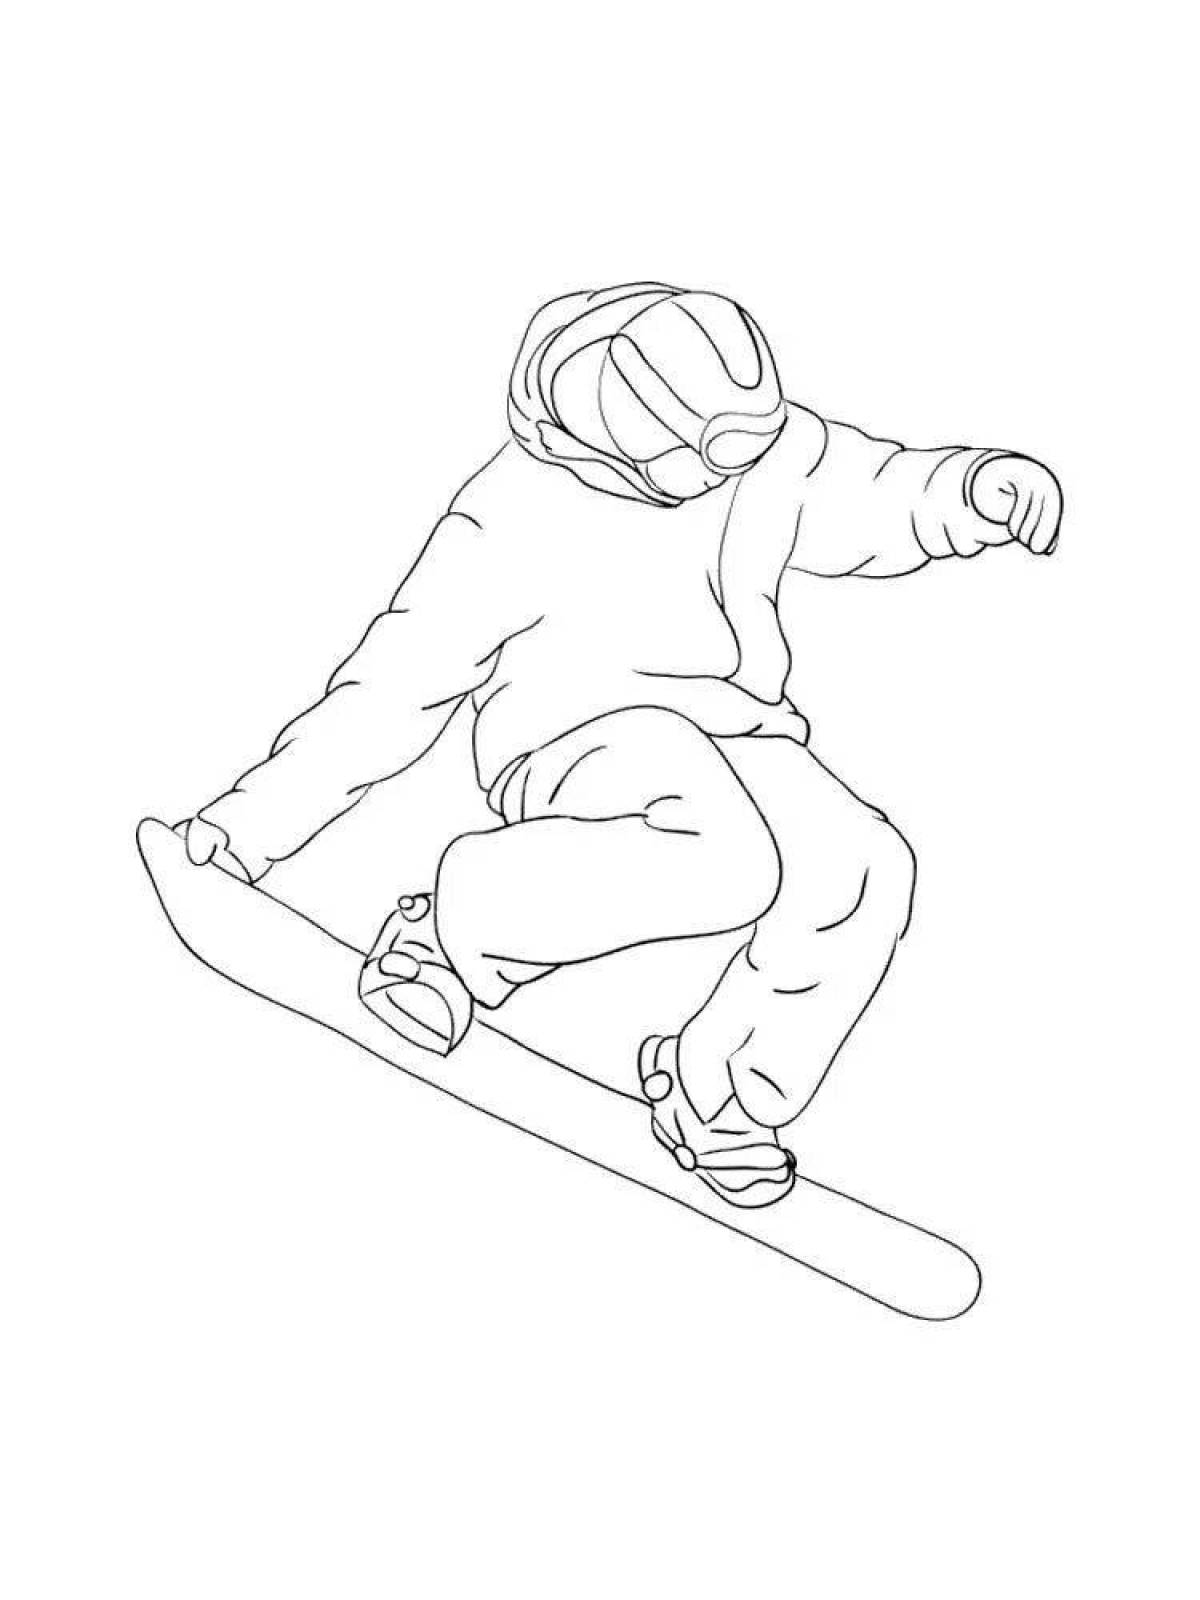 Fearless snowboarder coloring page